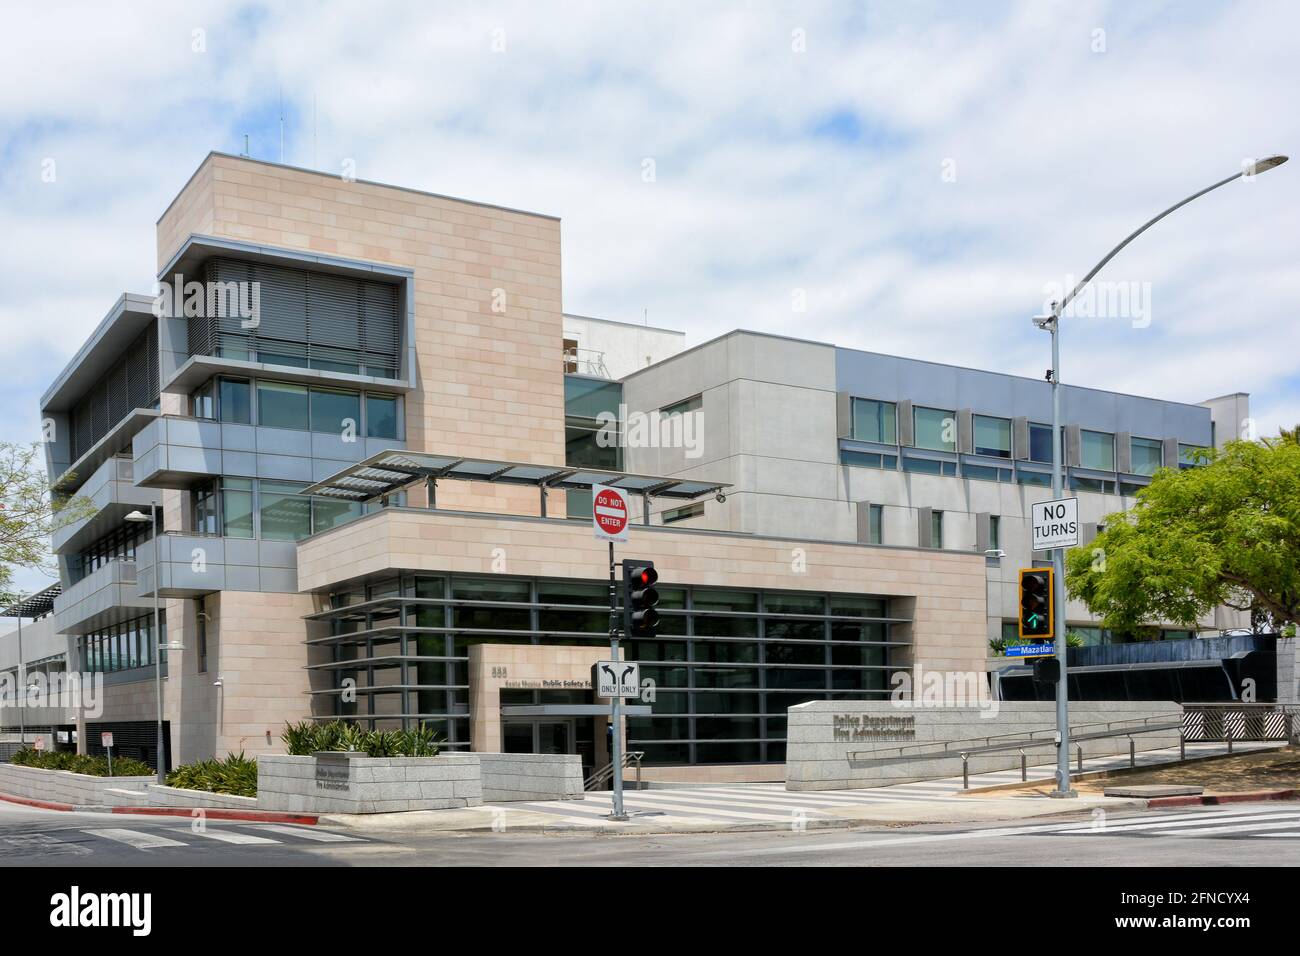 SANTA MONICA, CALIFORNIA - 15 MAY 2021: Santa Monica Public Safety Building, housing the Police Department and Fire Administration. Stock Photo